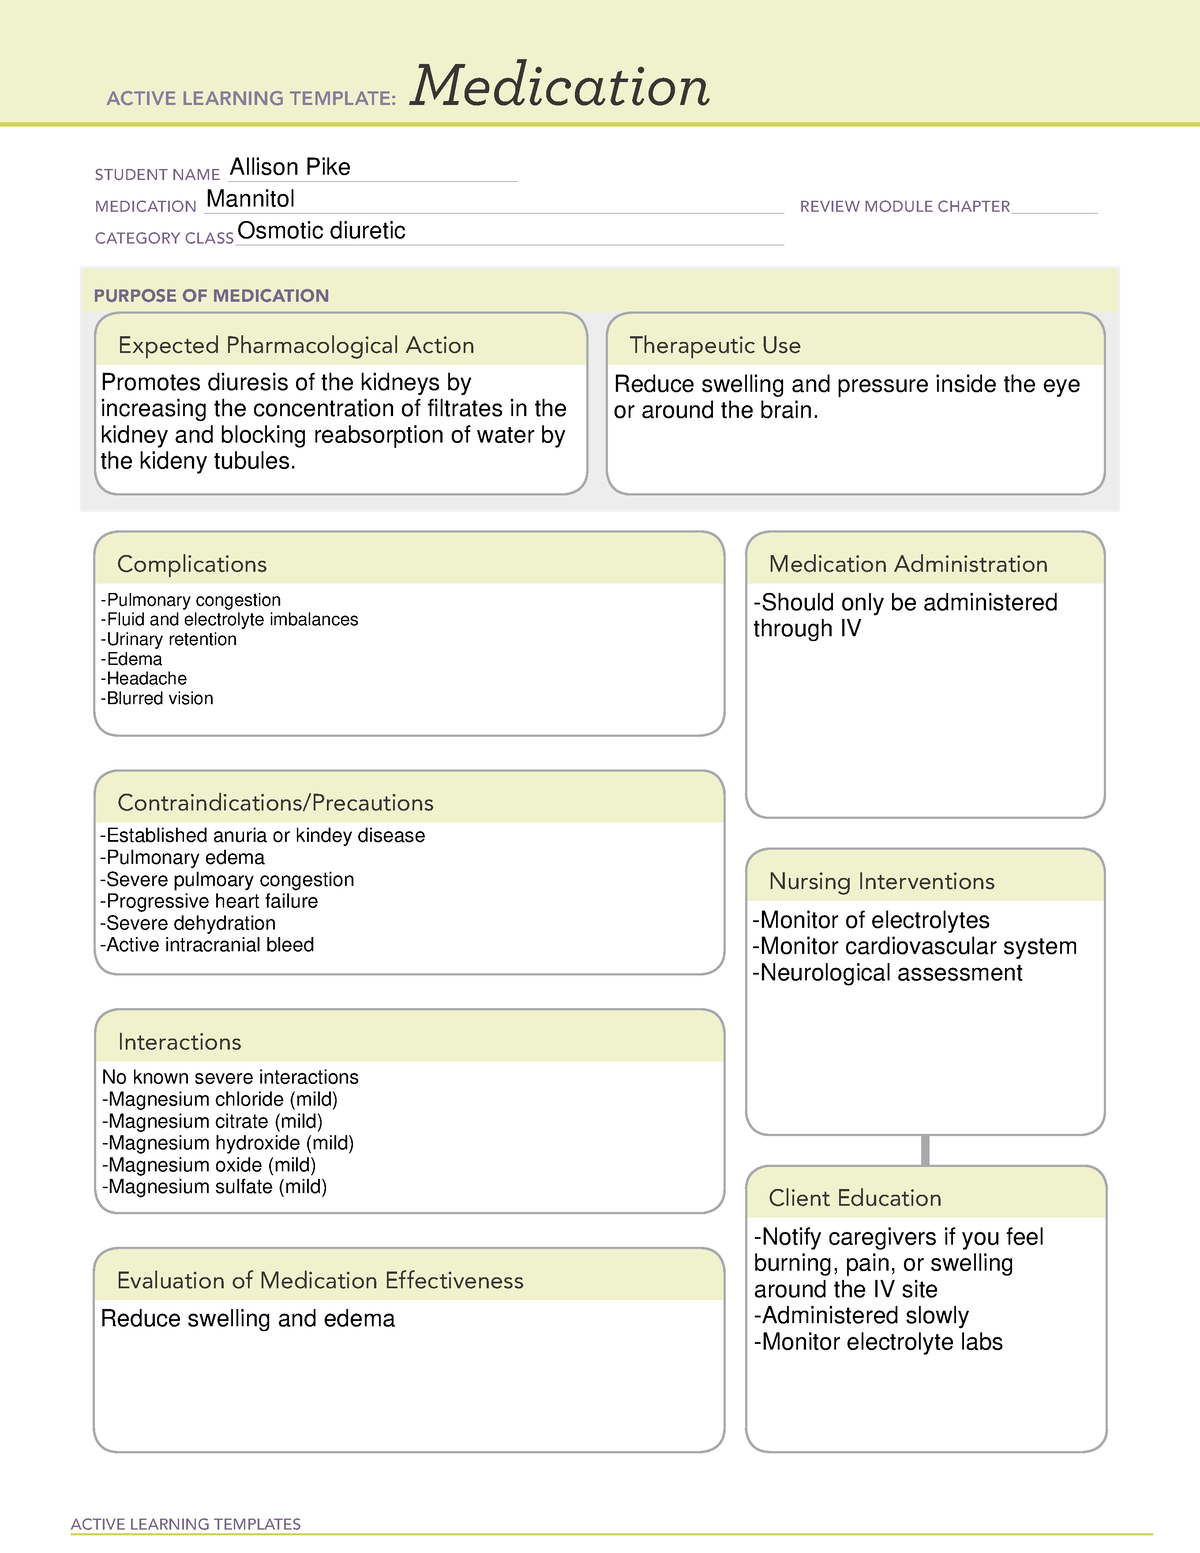 Mannitol ATI med card ACTIVE LEARNING TEMPLATES Medication STUDENT